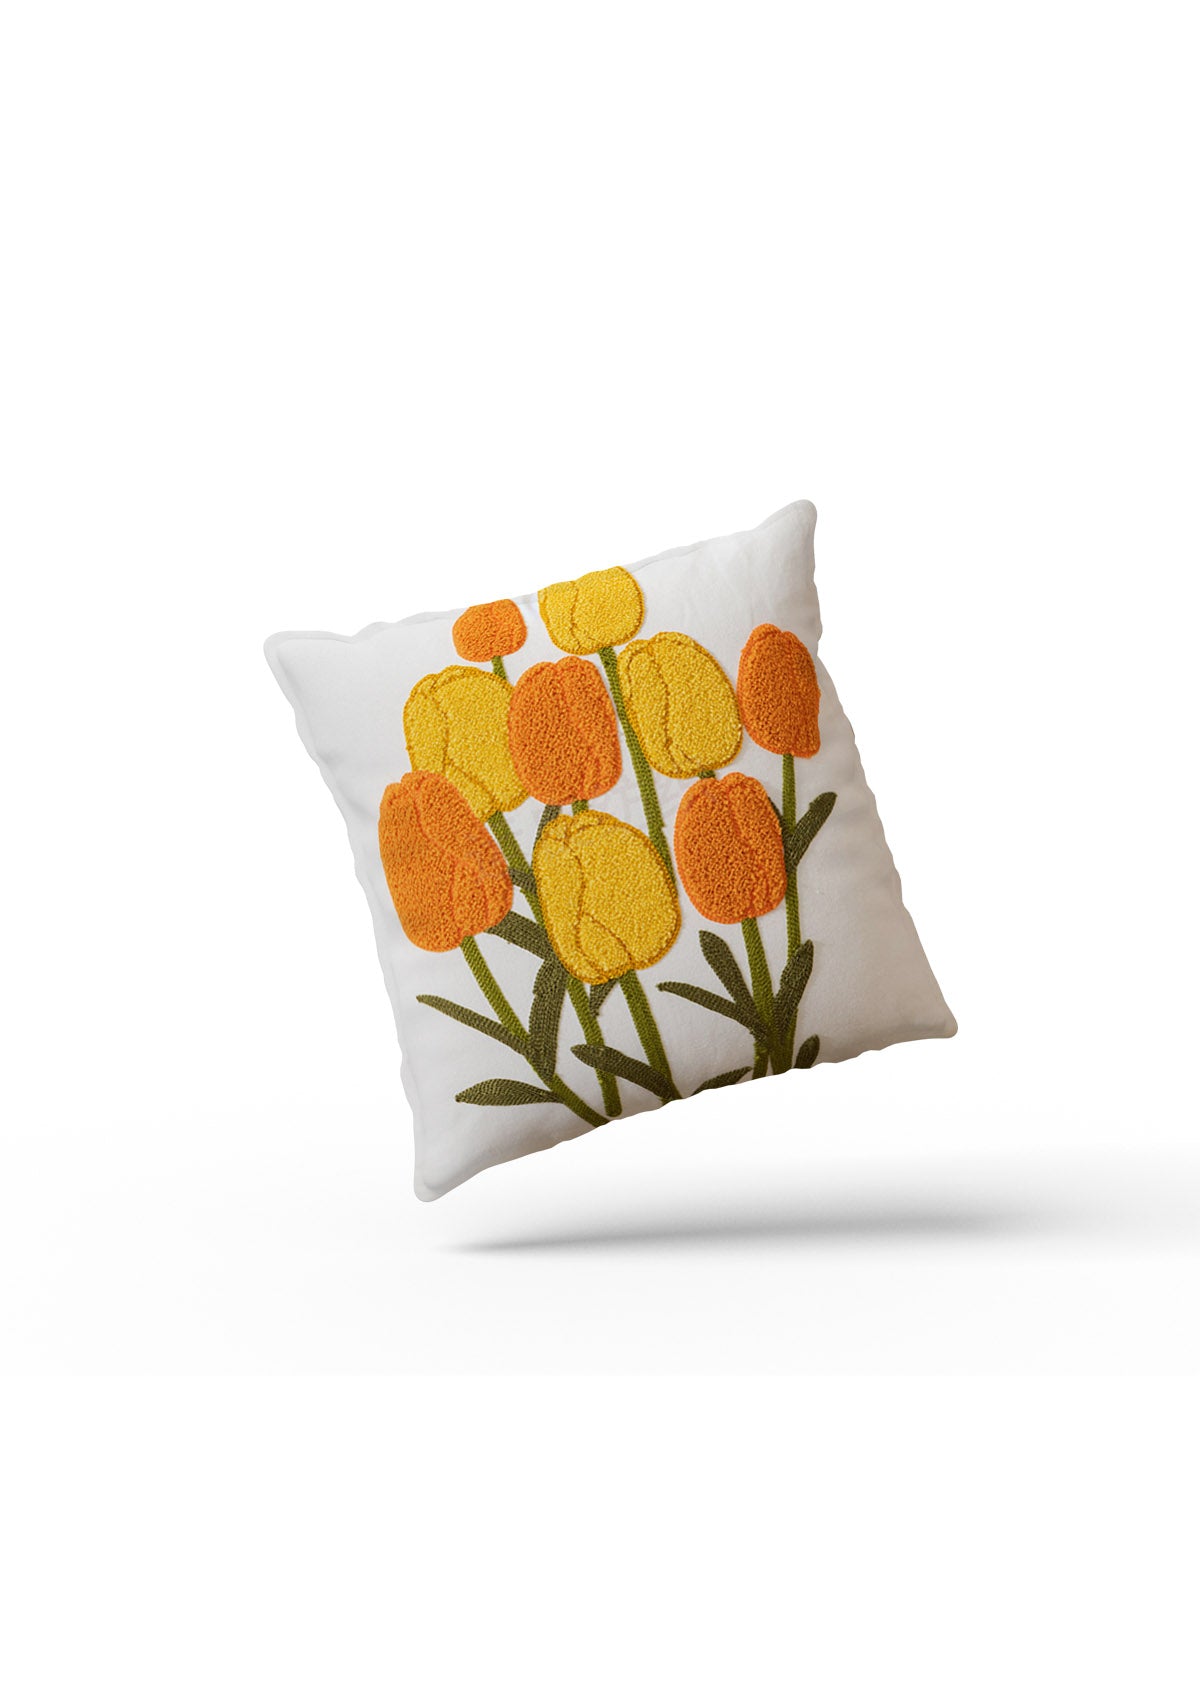 Fall-inspired floral design on a cushion cover, bringing warmth and beauty to your home